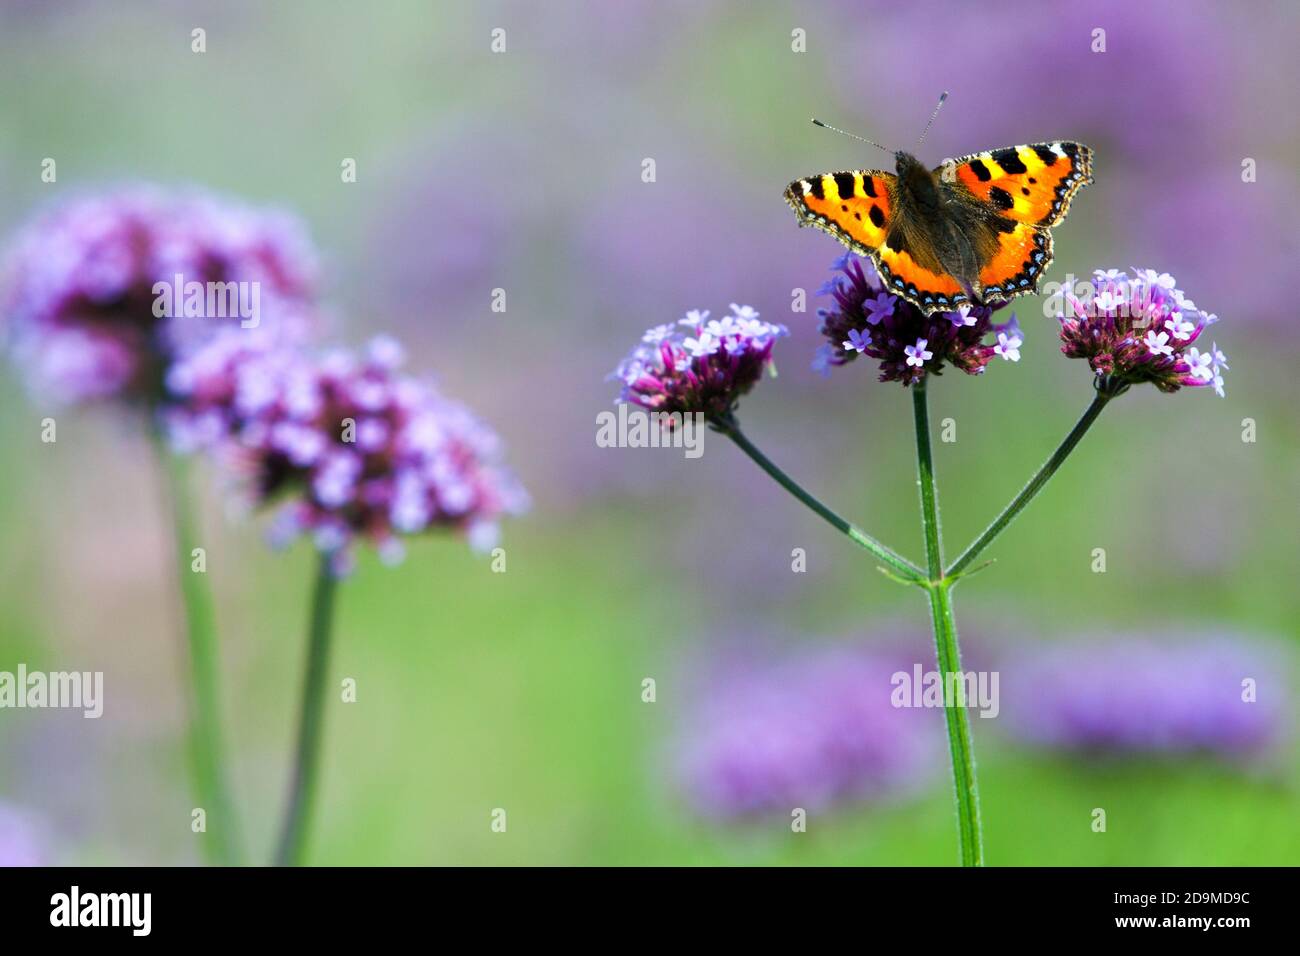 Summer garden butterfly The Small Tortoiseshell Butterfly Aglais urticae, Nymphalidae Verbena flower lavender colour Stock Photo